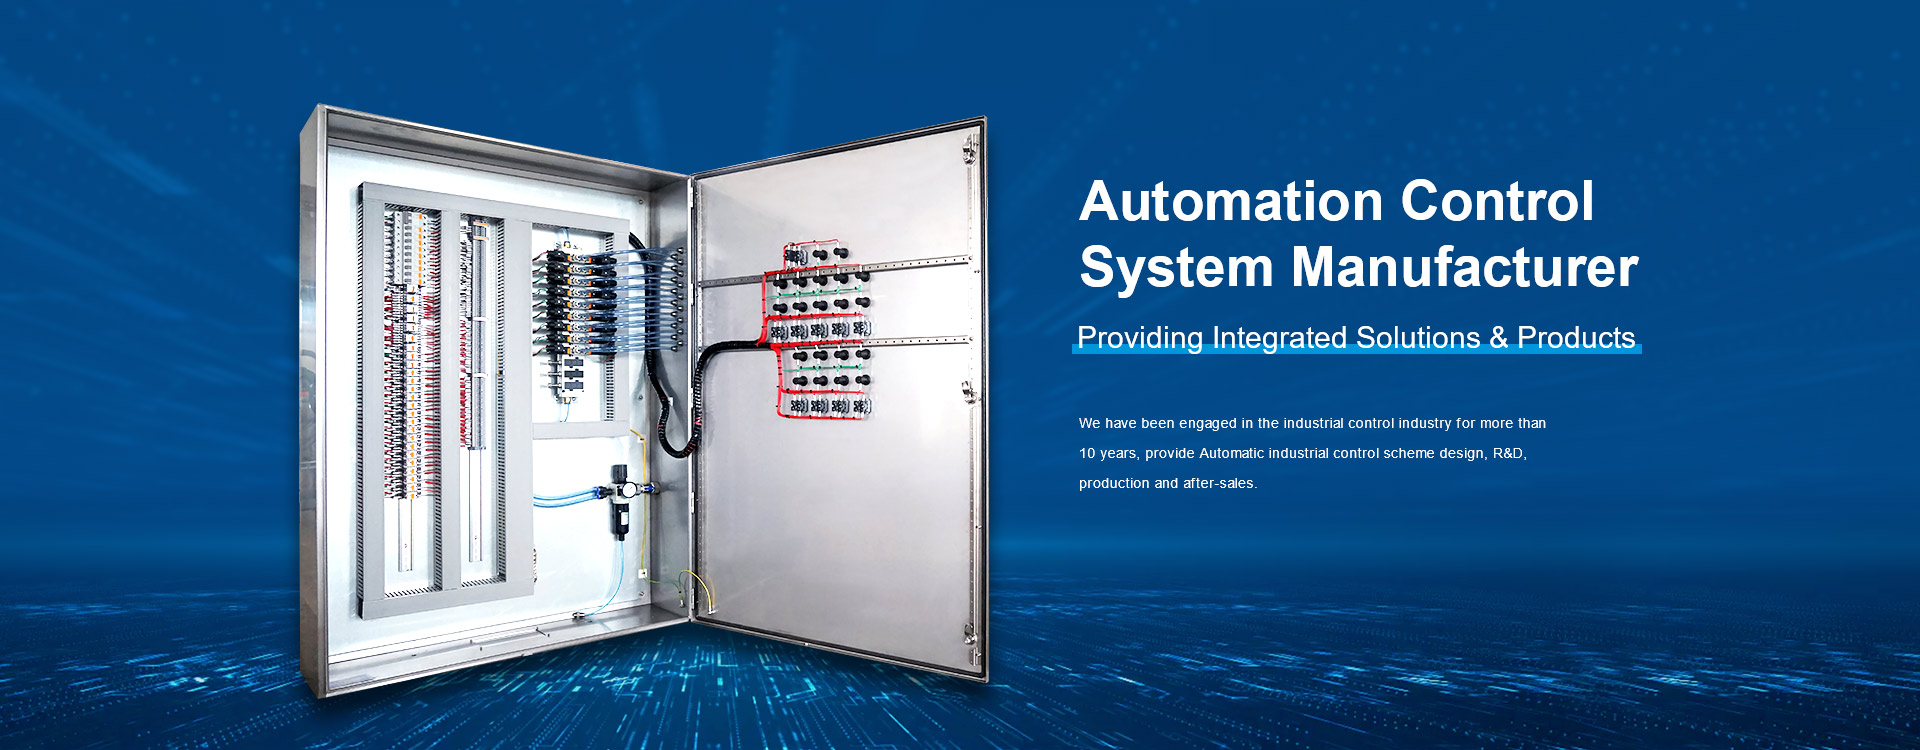 Automation Control System Manufacturer